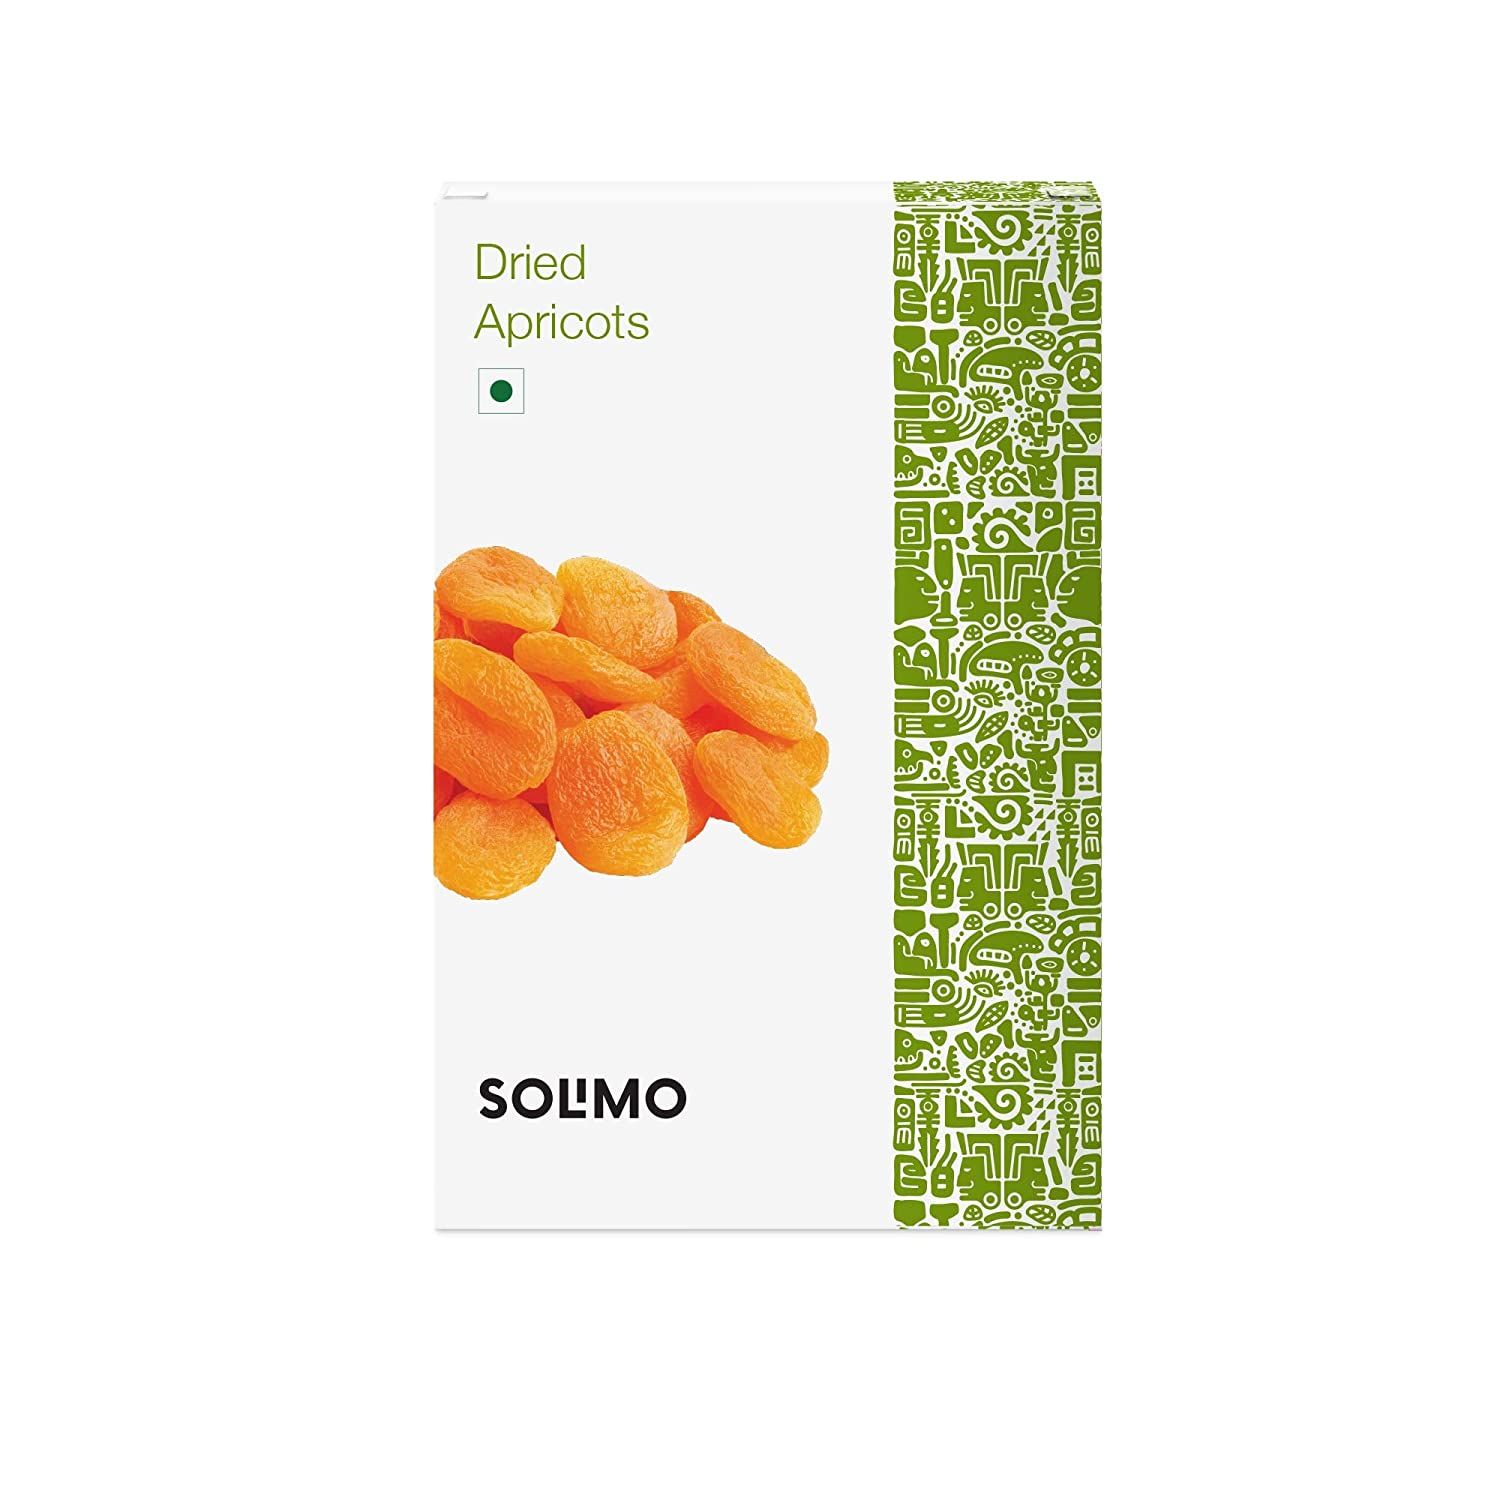 Solimo Dried Apricots Image